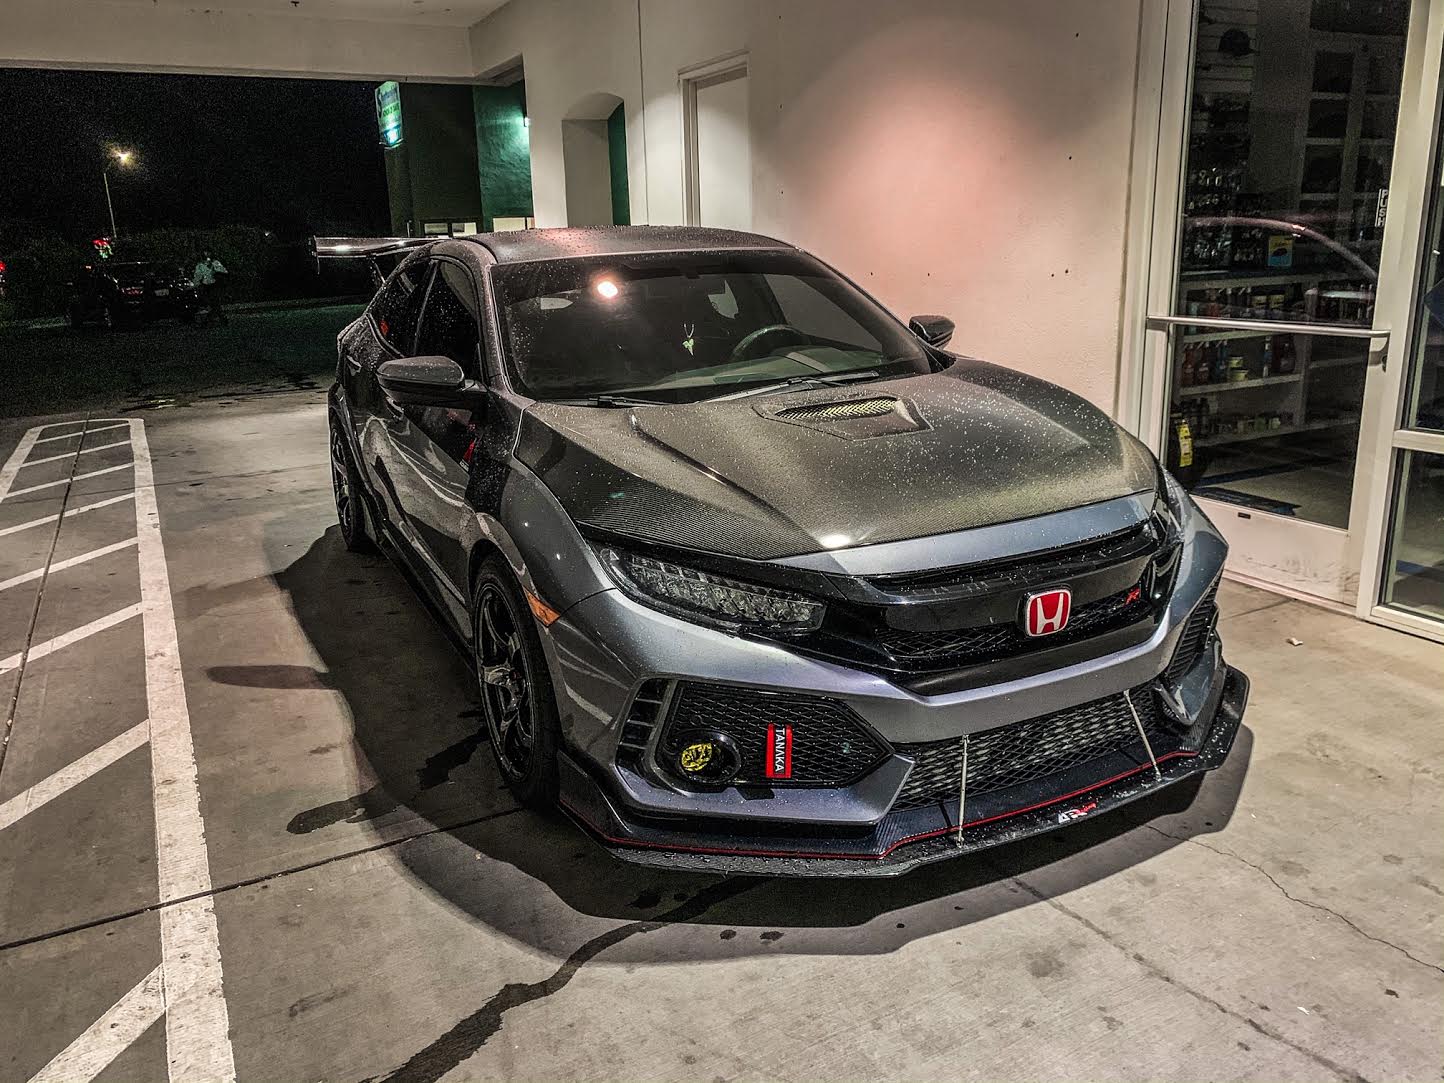 Honda Civic 10th gen Official Polished Metal Metallic Type R Picture Thread 0